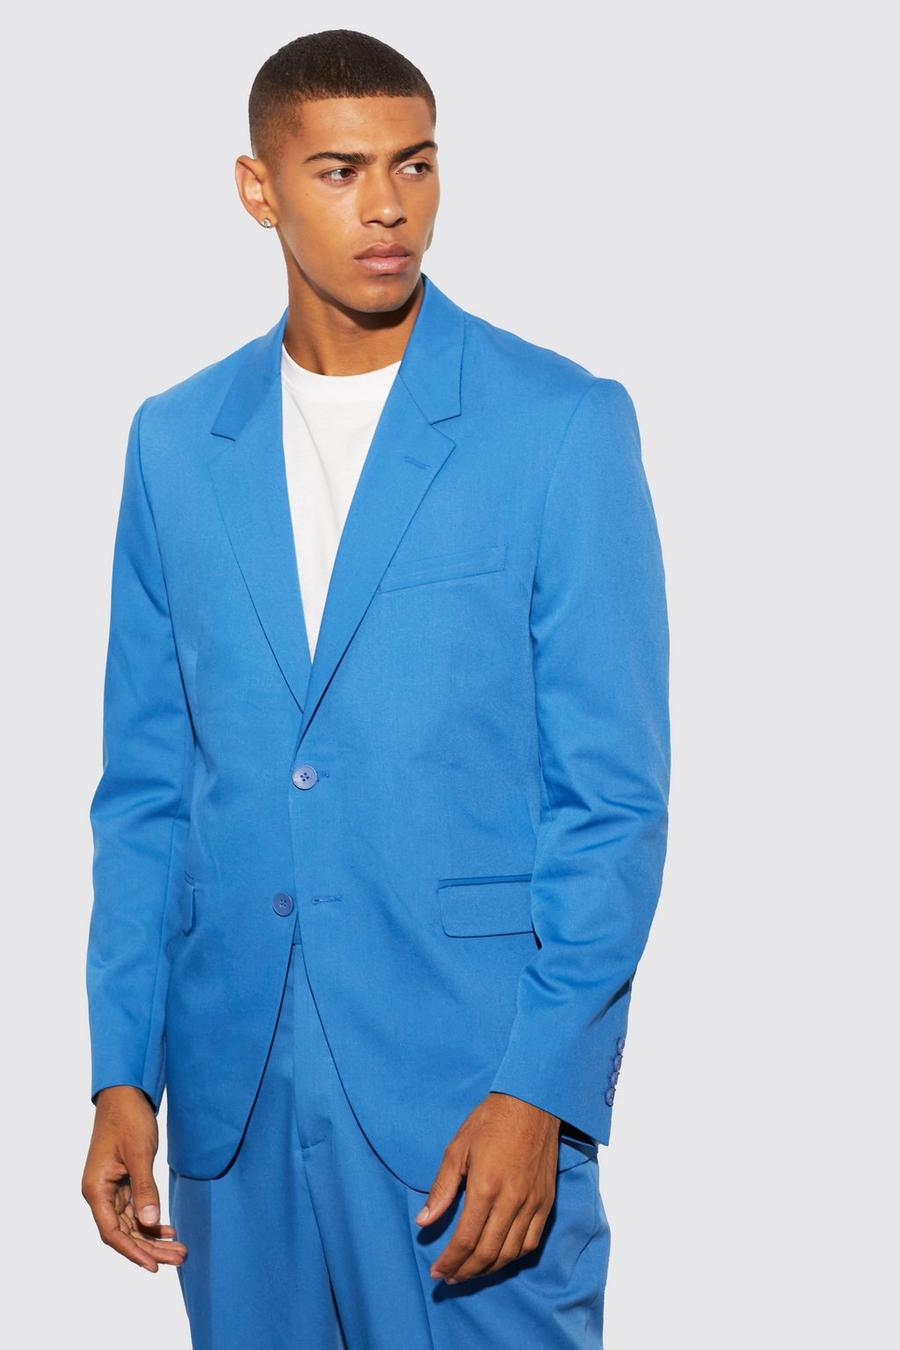 Marine blue Relaxed Fit Single Breasted Suit Jacket